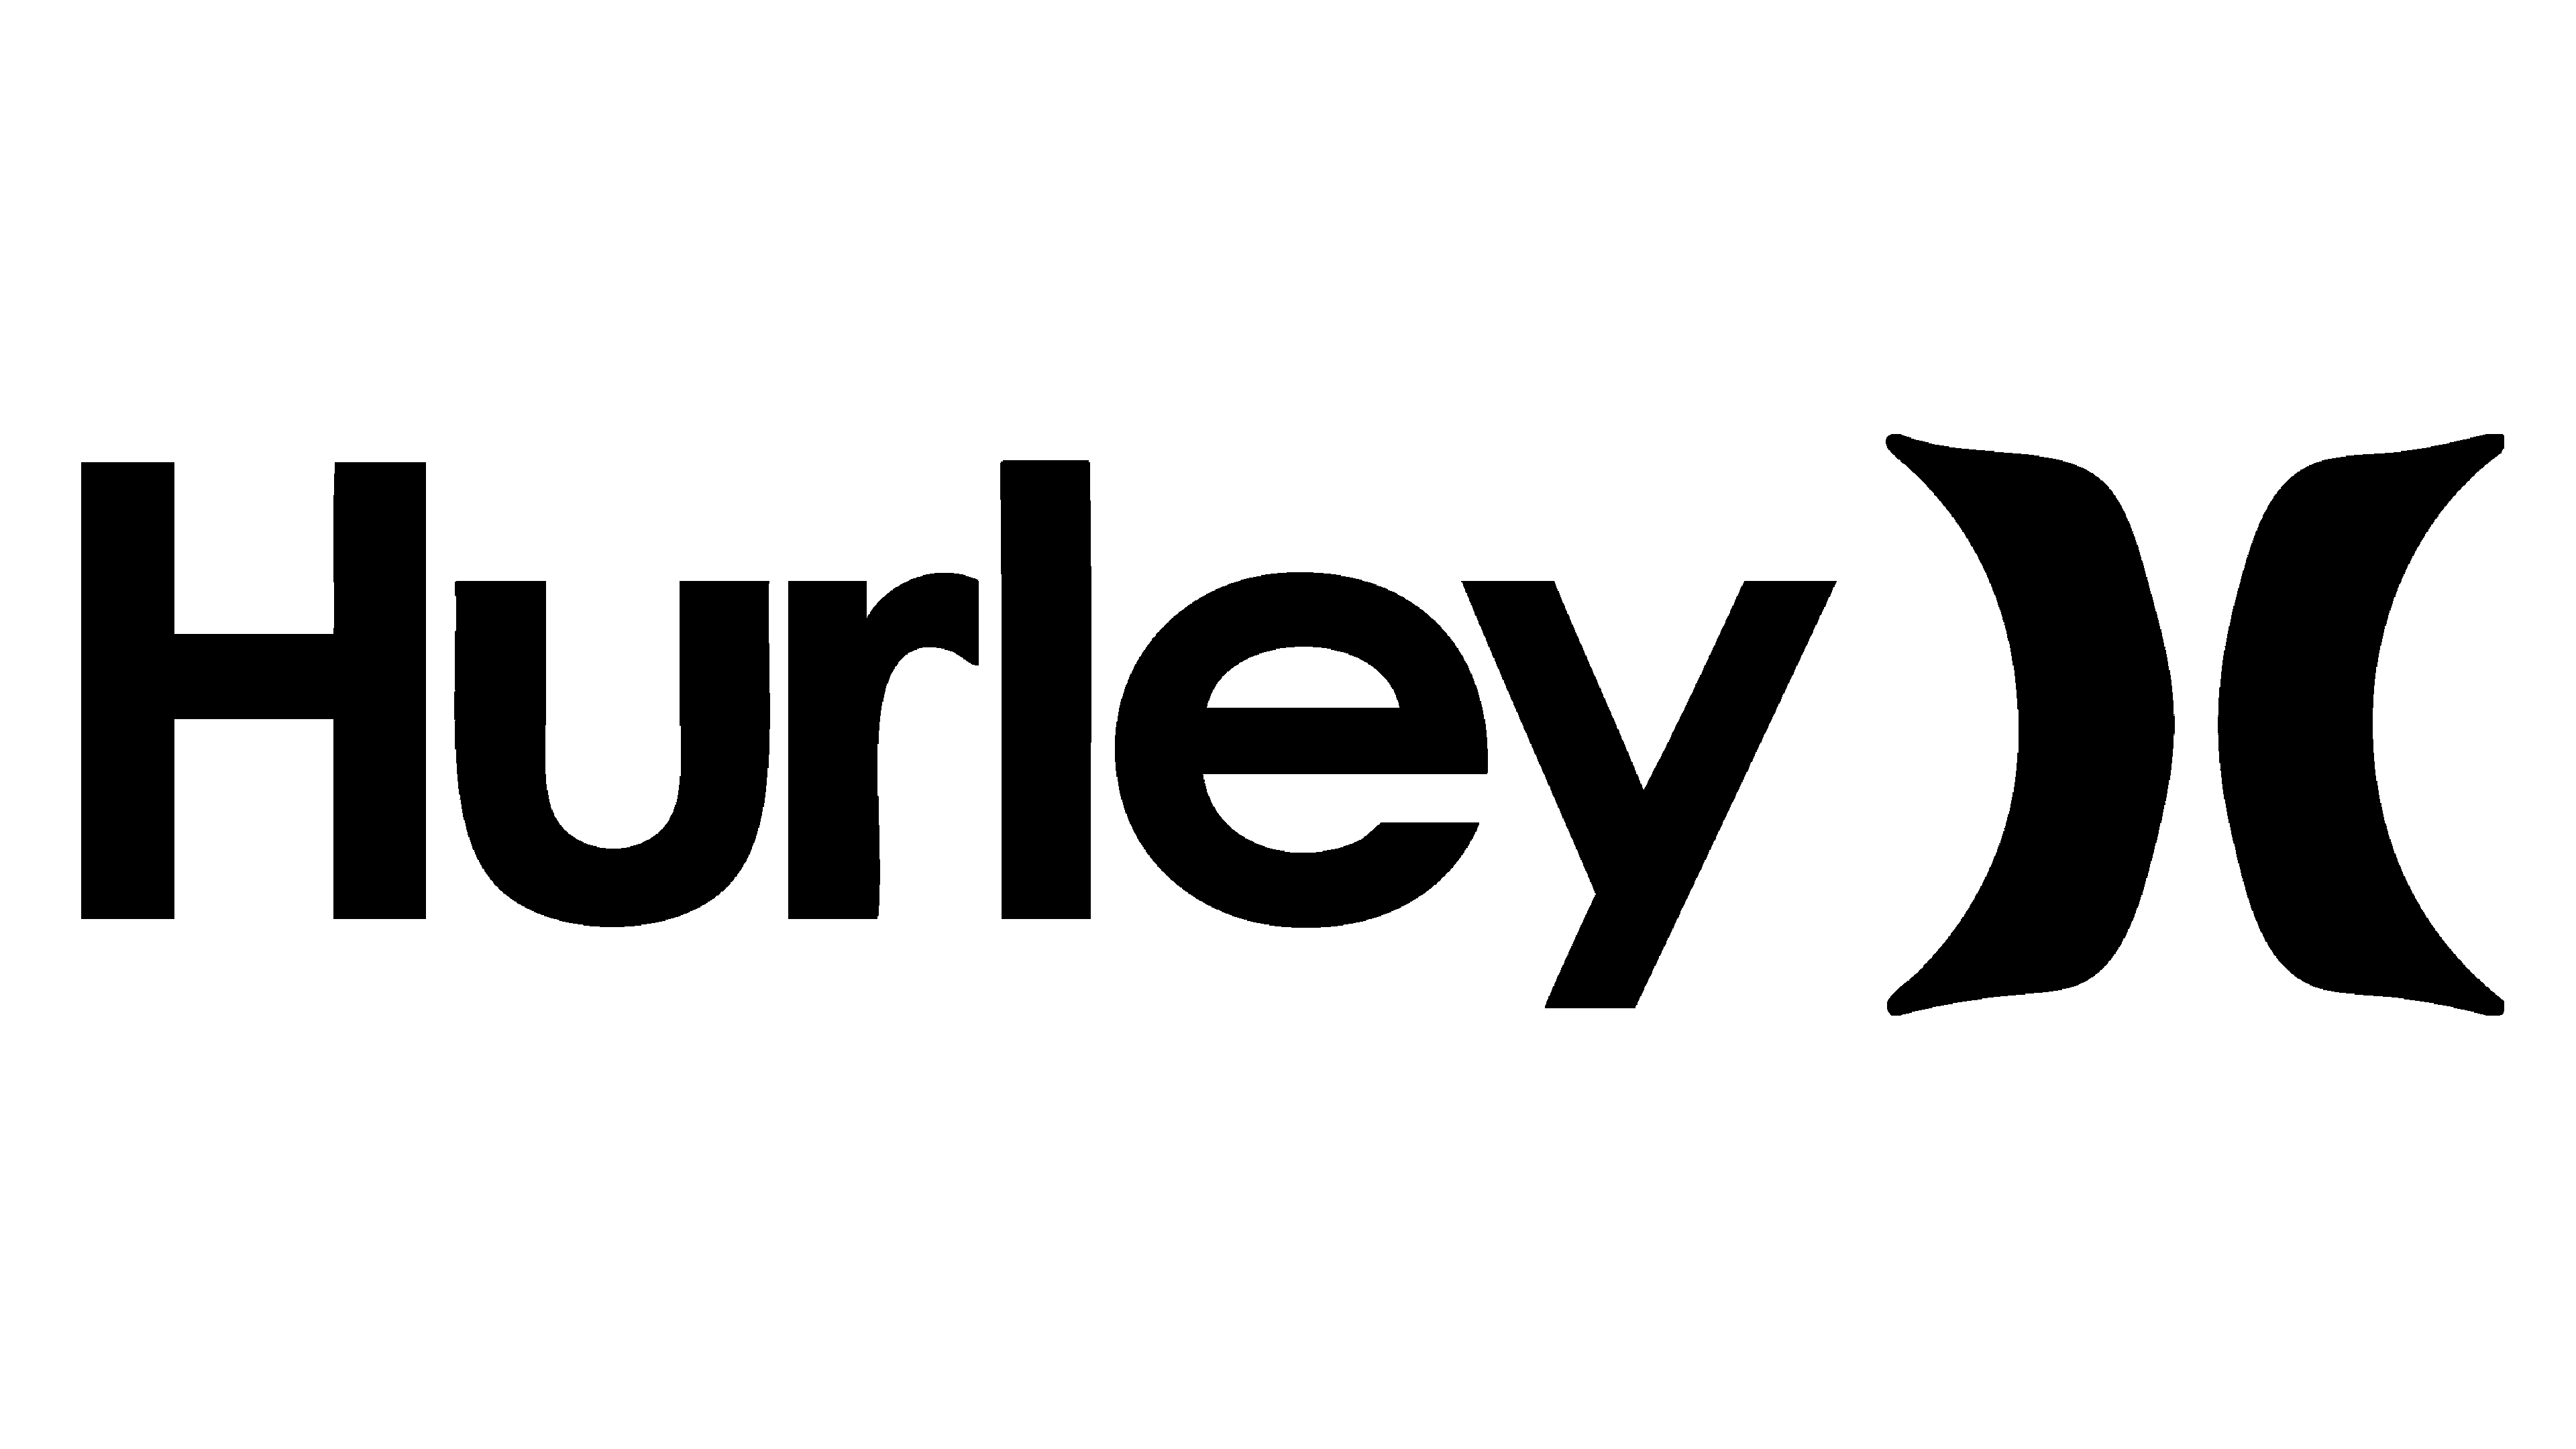 With Hurley Brand Product